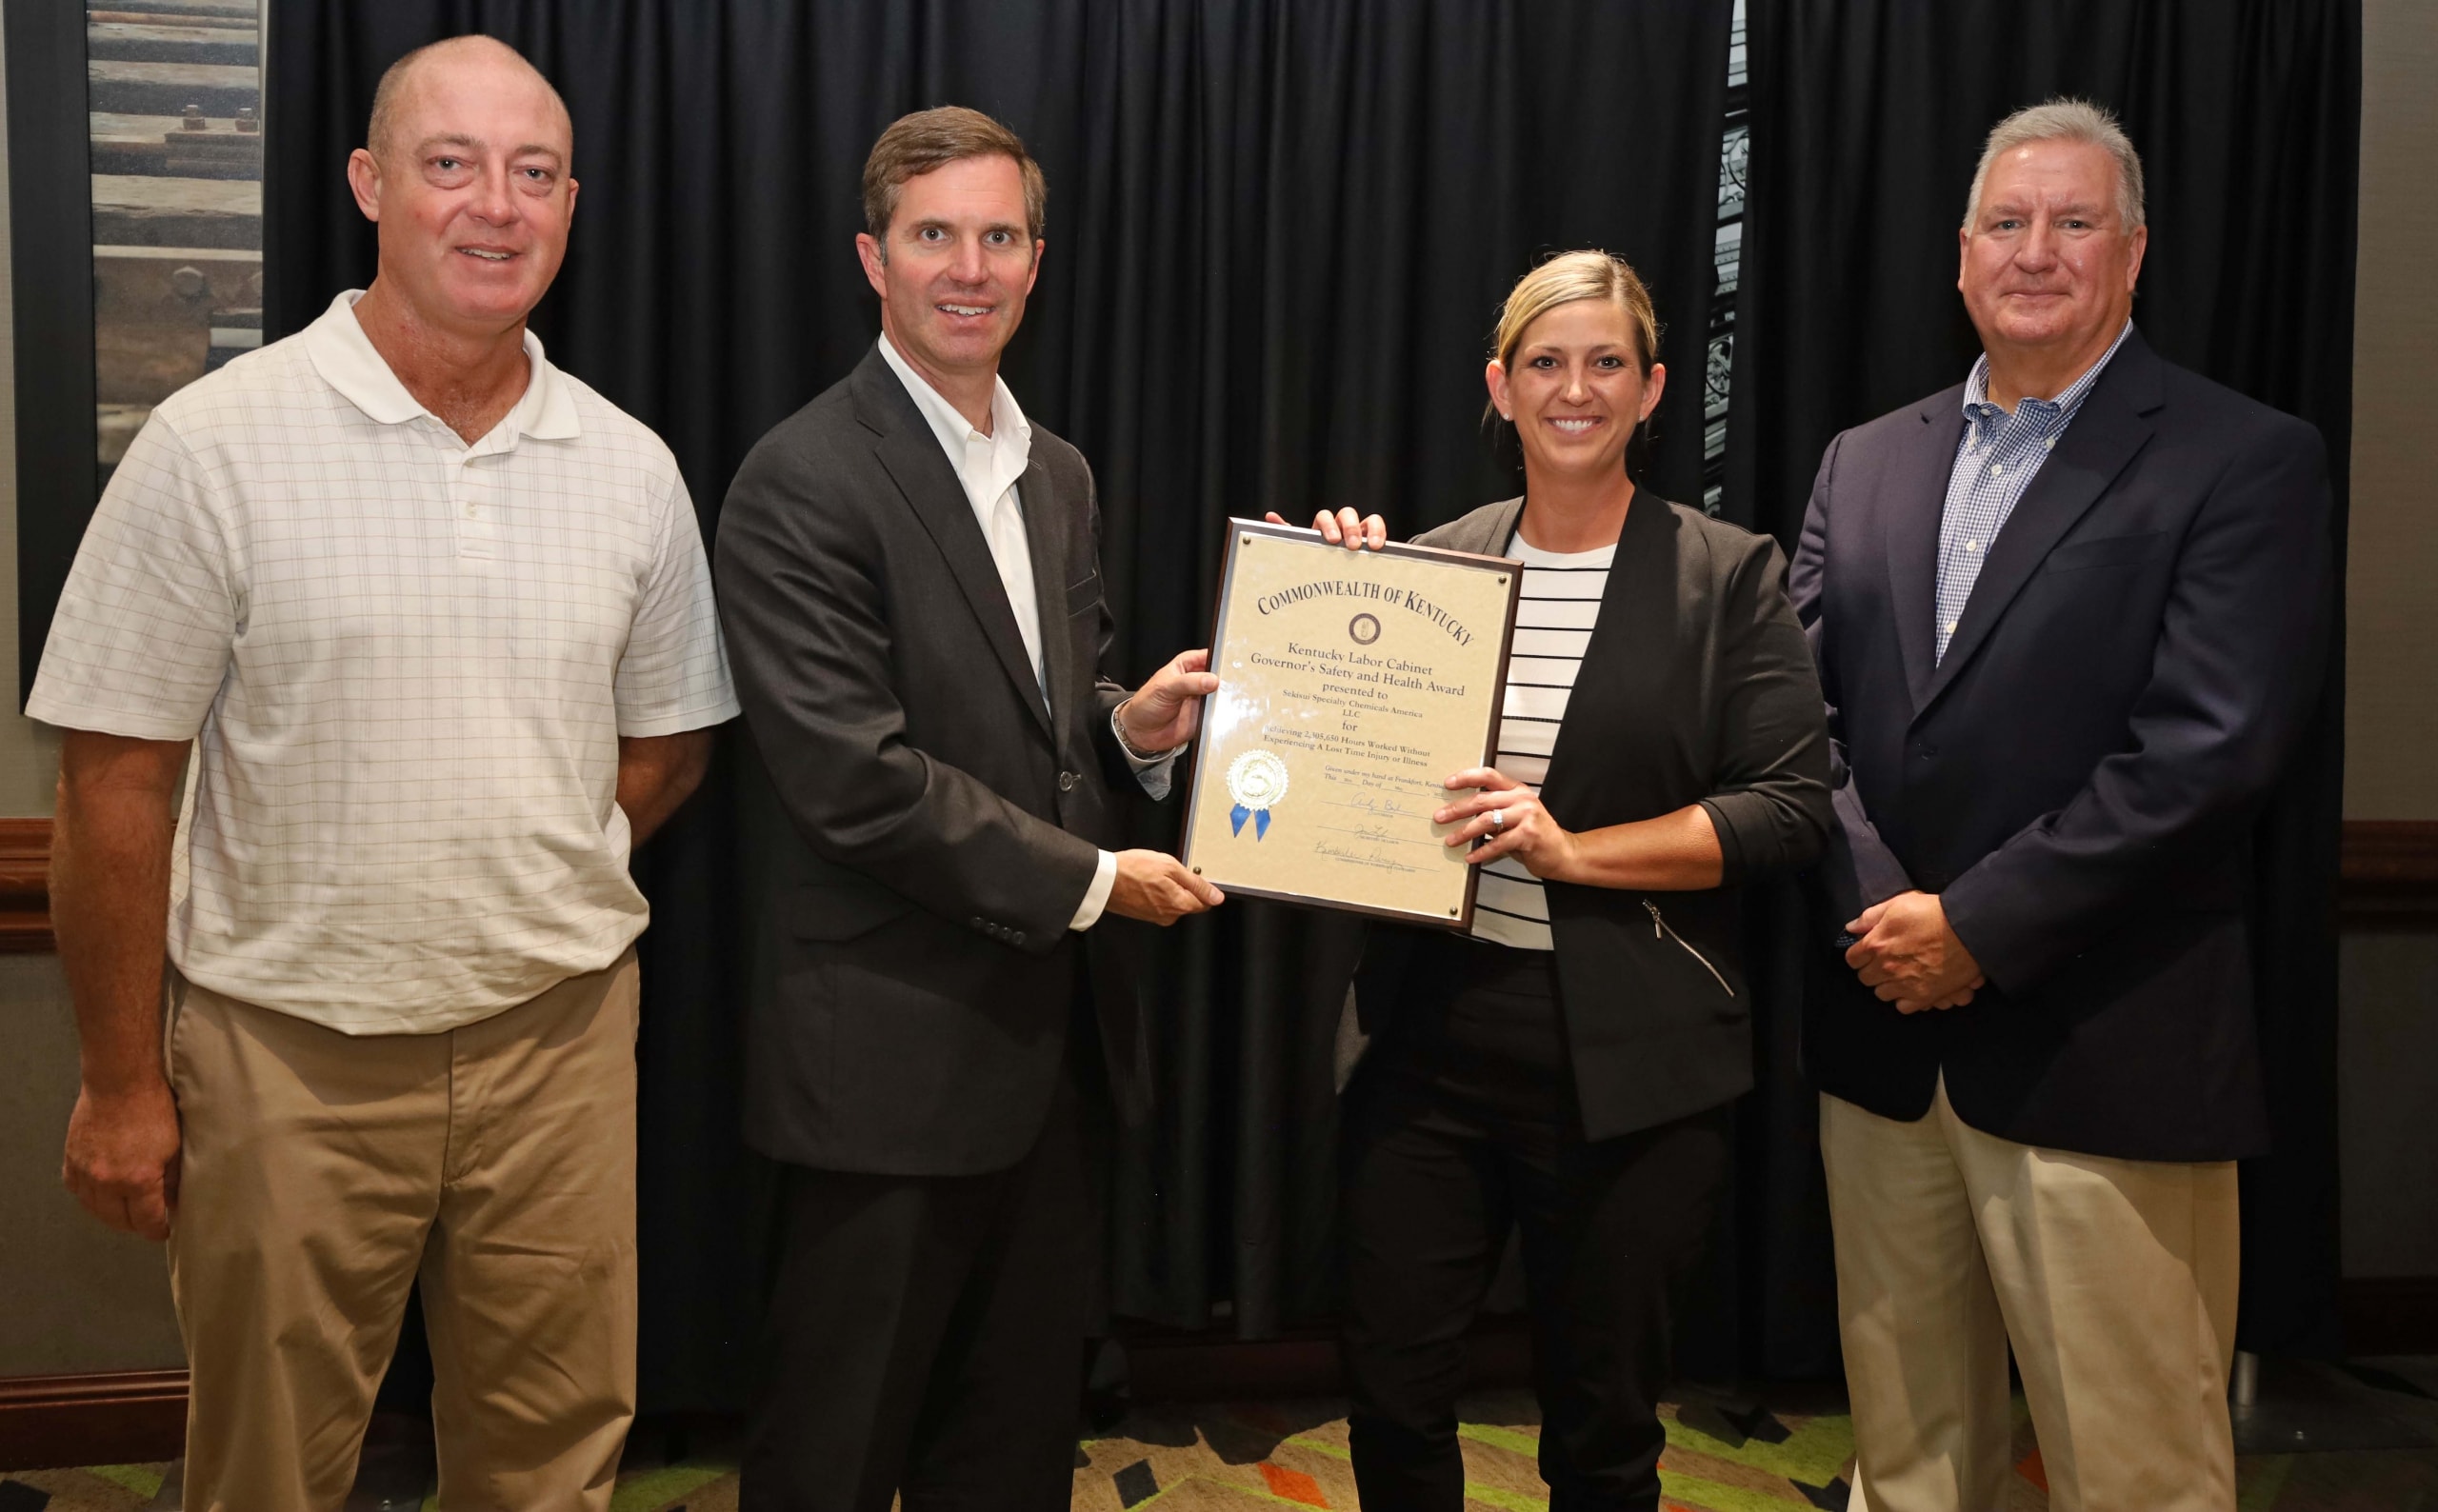 Calvert City Plant Earns Governor’s Safety and Health Award